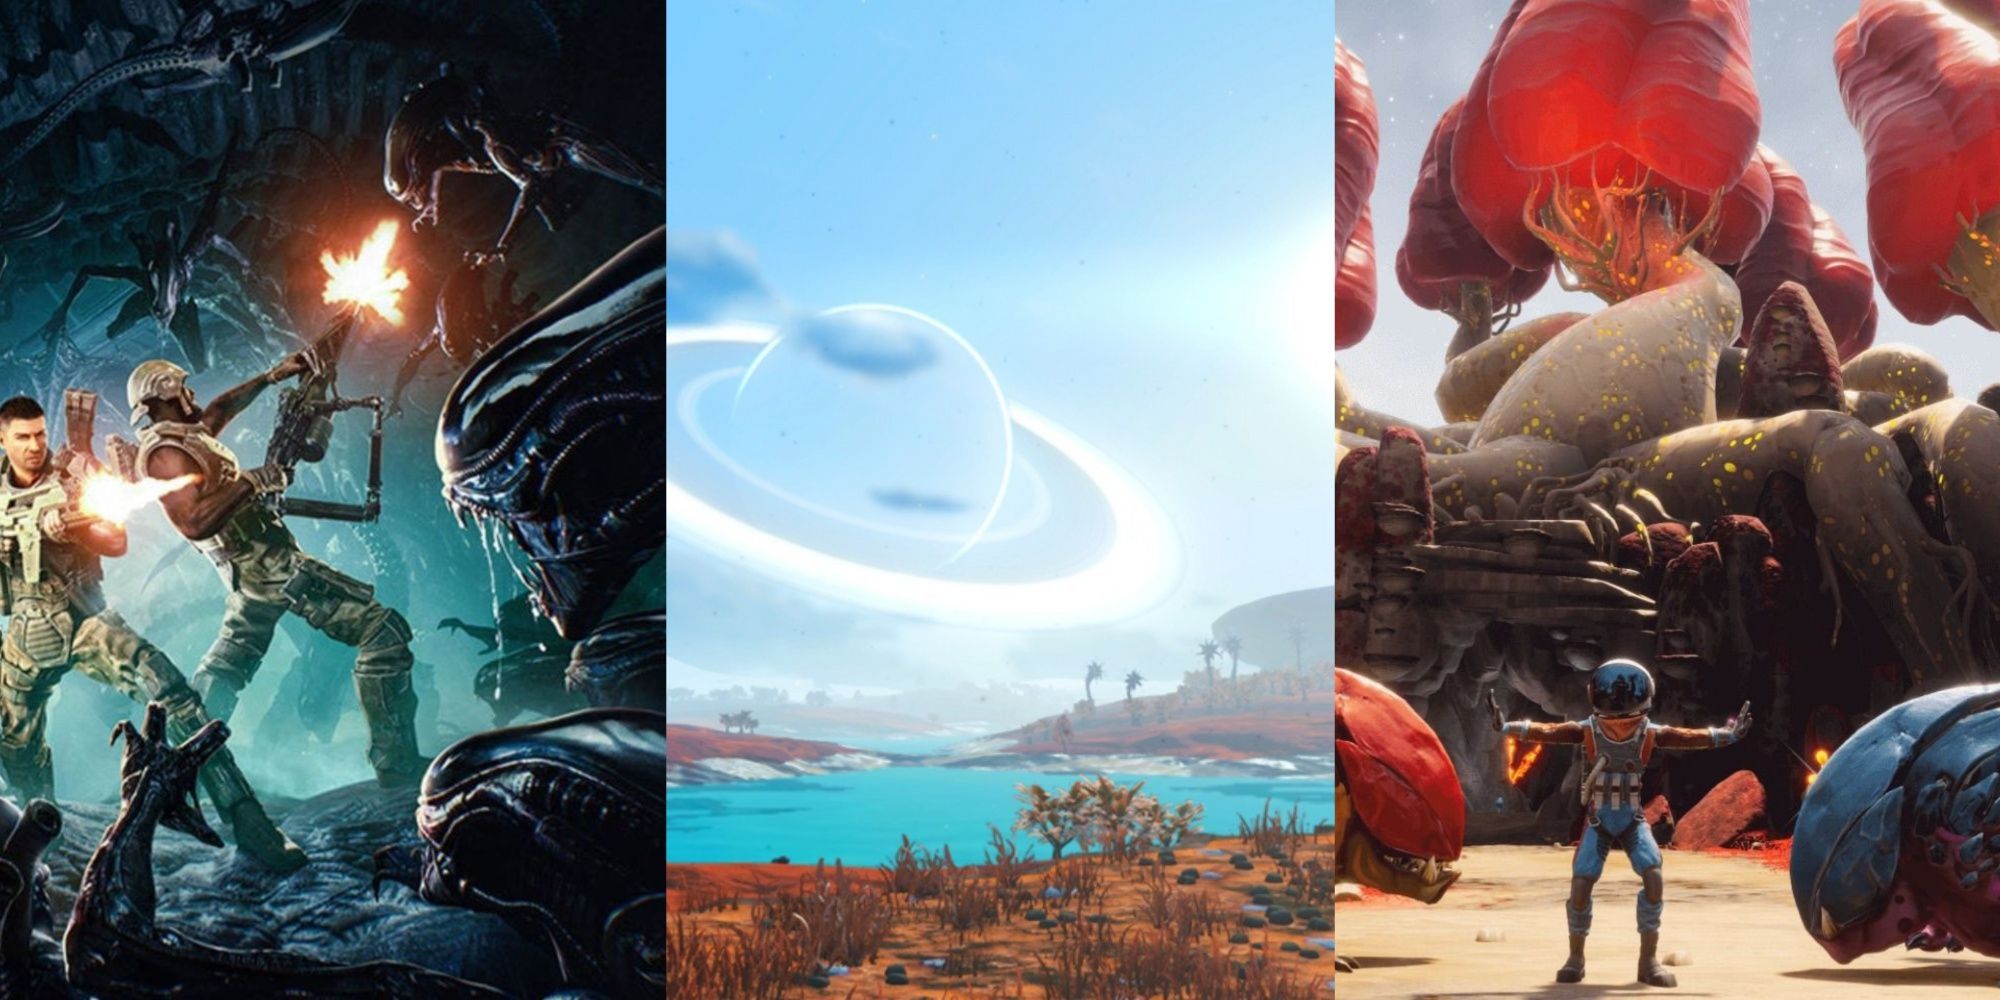 A three-image collage of artwork for Aliens: Fireteam Elite, a scenic planet environment in No Man's Sky, and a character from Journey To The Savage Planet in between alien creatures.